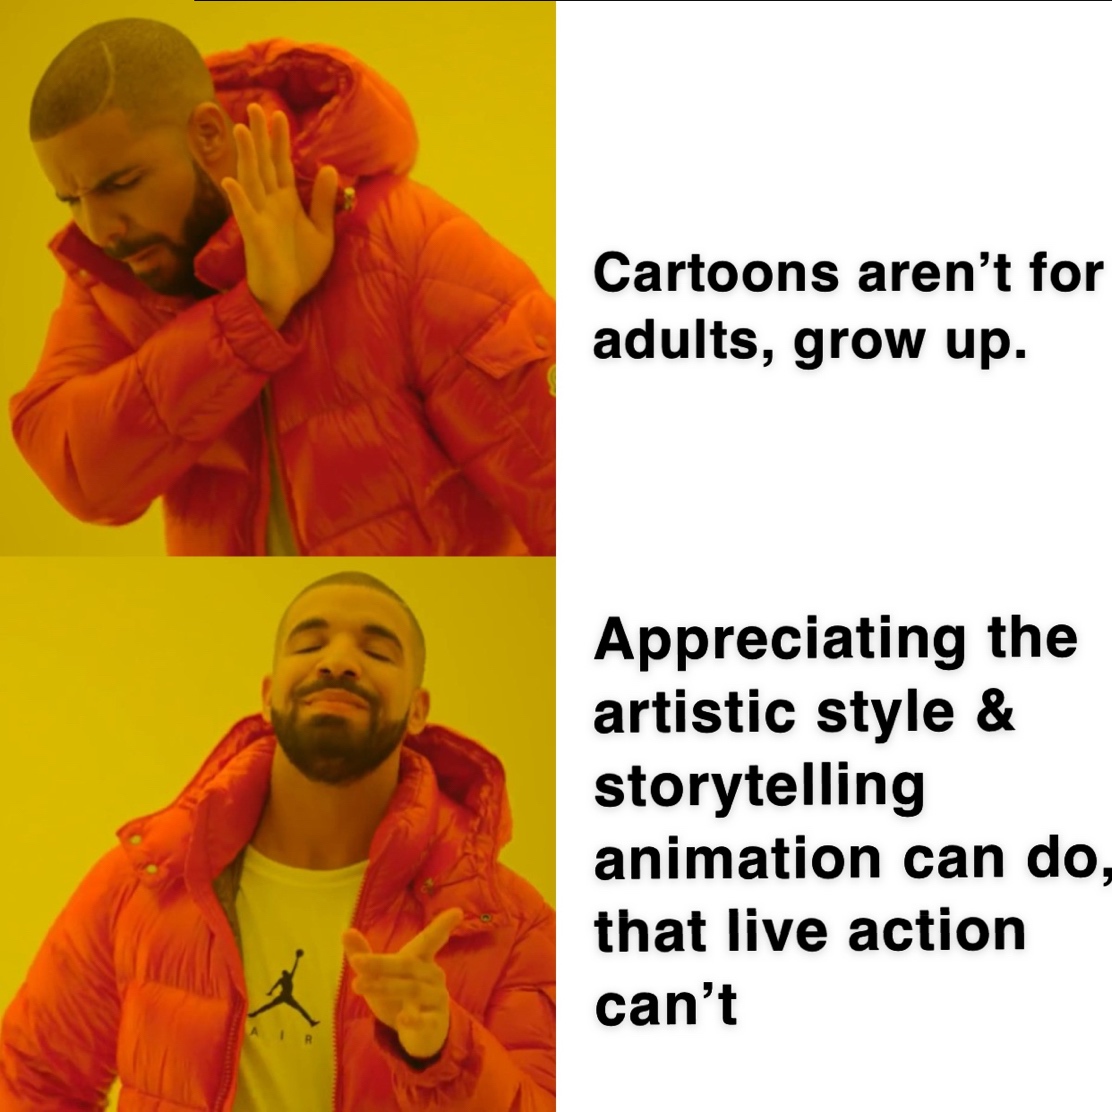 if you love two people - Cartoons aren't for adults, grow up. Appreciating the artistic style & storytelling animation can do, that live action can't